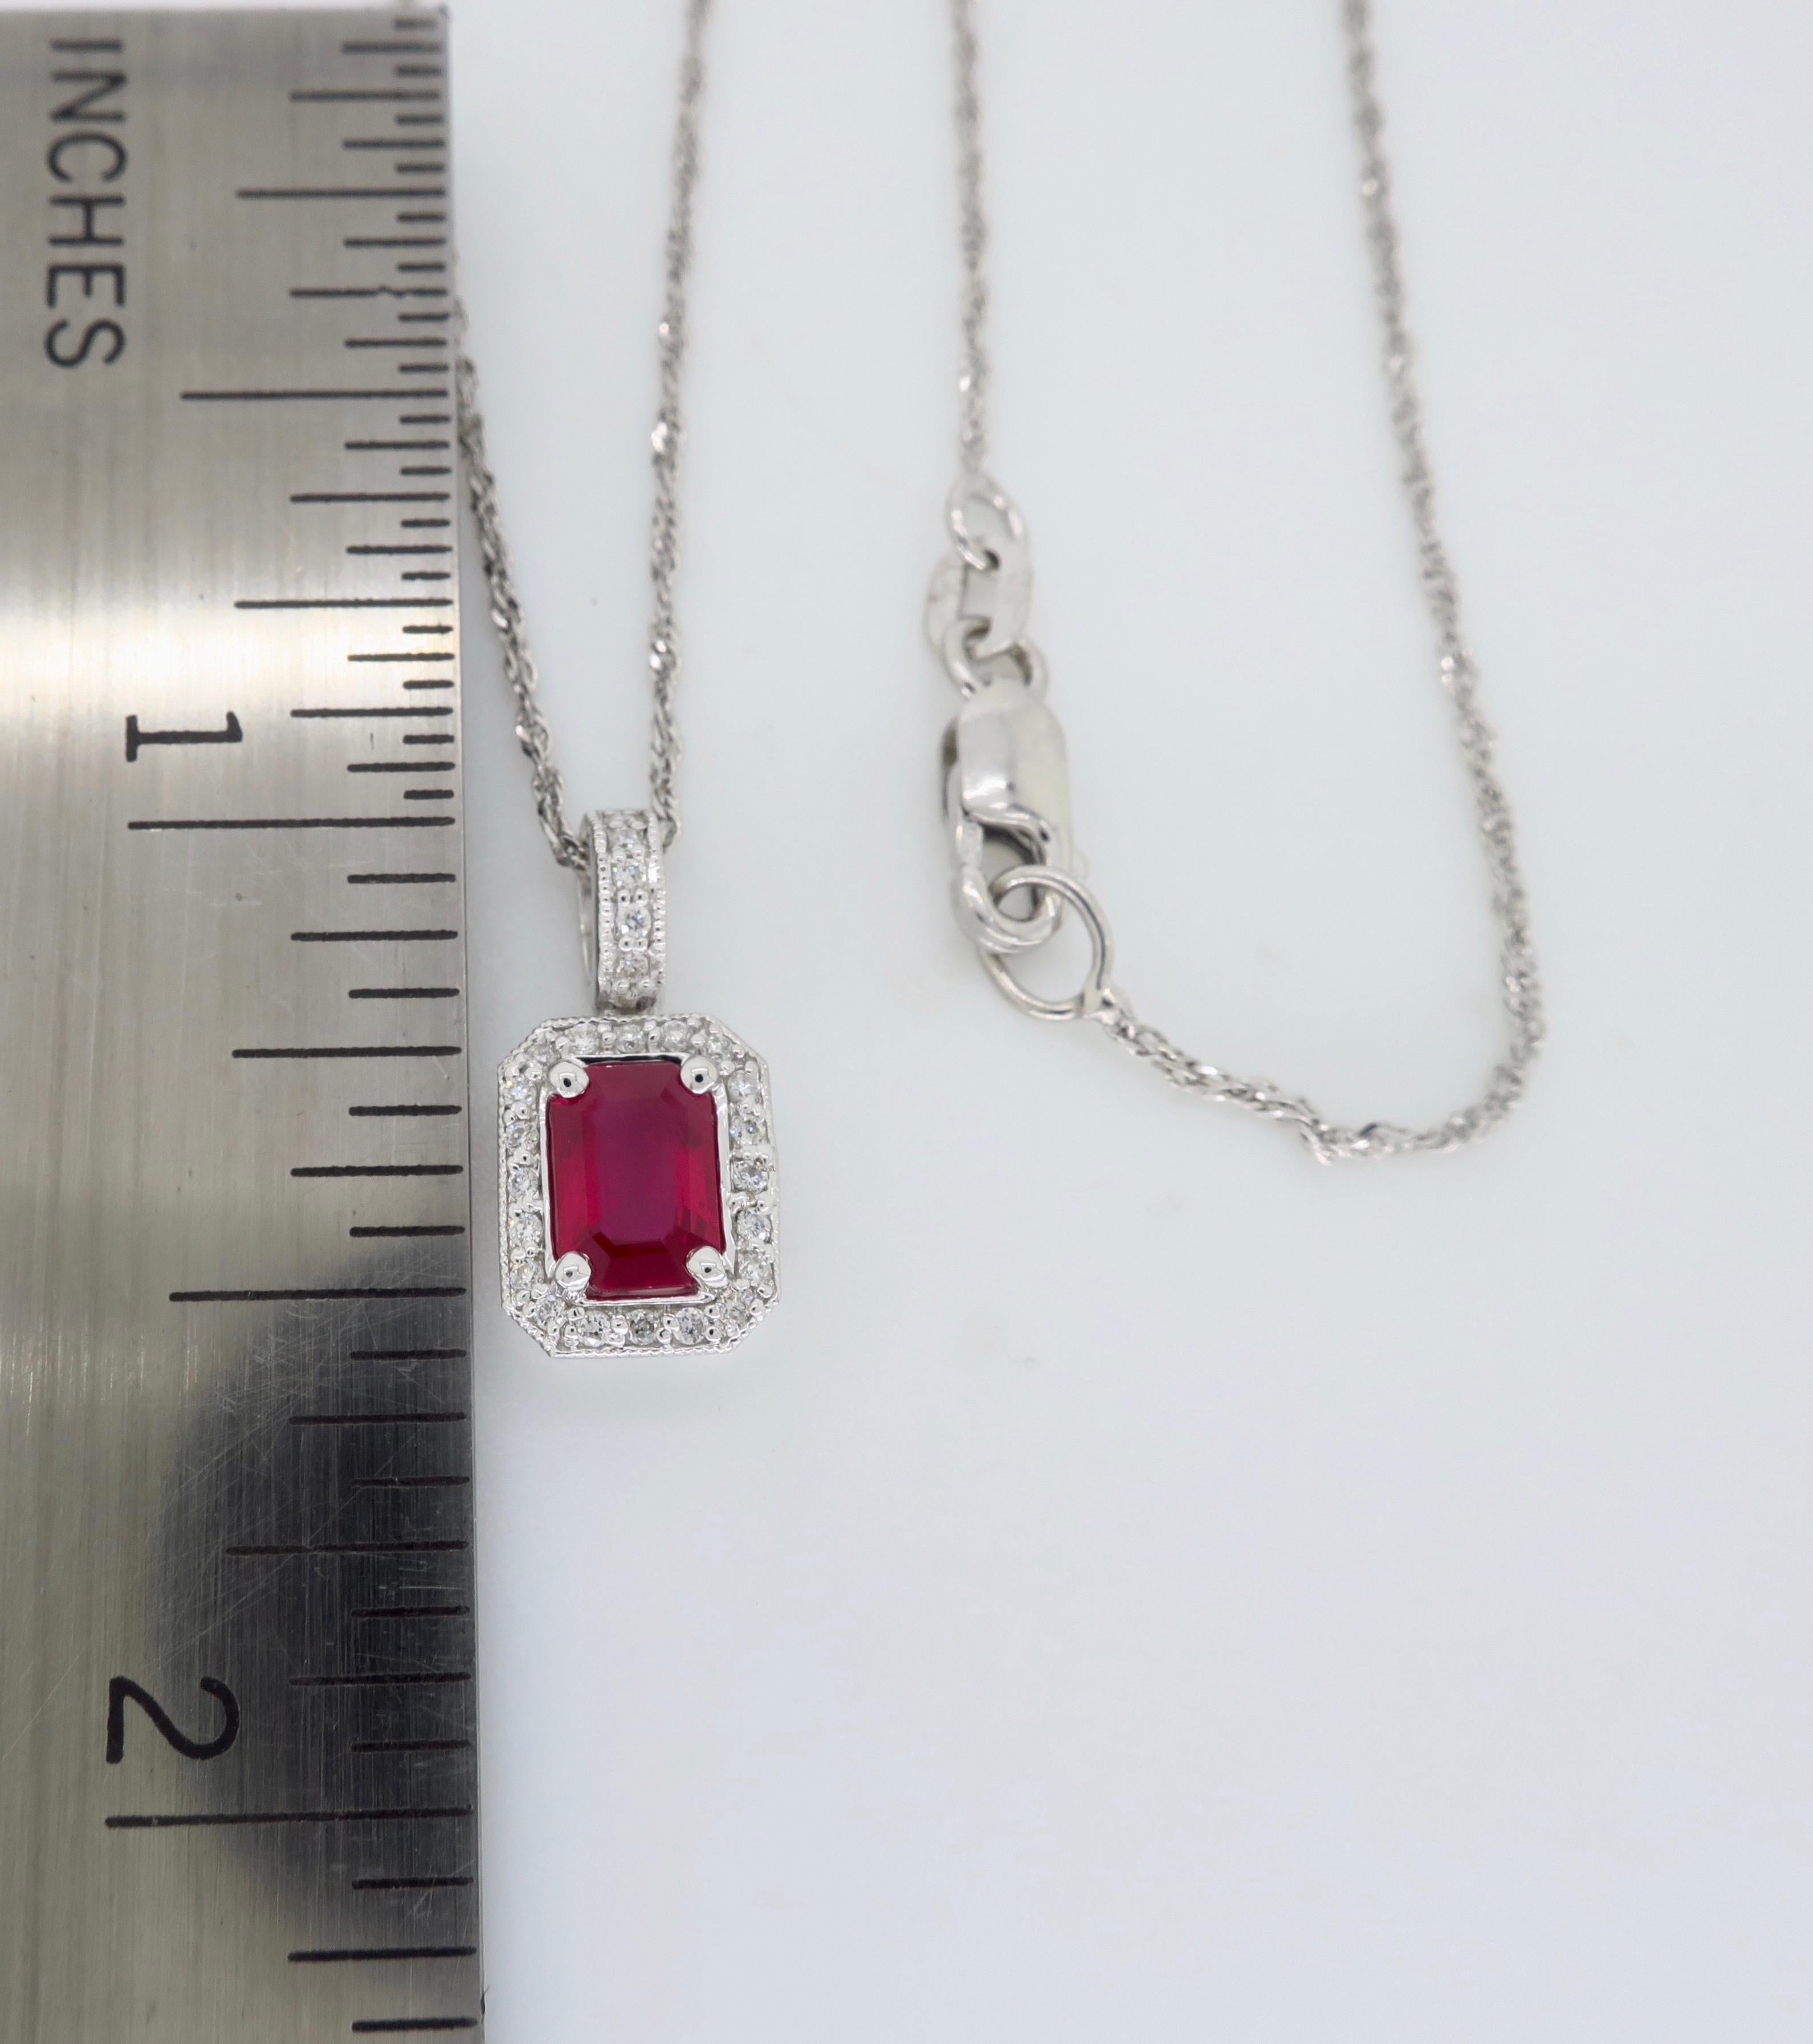 Ruby and diamond halo style pendant necklace crafted in 14k white gold.

Gemstone: Approximately 4x6mm Ruby
Diamond Carat Weight: .13CTW
Diamond Cut: Round Brilliant Diamond
Color: Average G-I
Clarity: Average SI-I
Metal: 14K White Gold 
Chain